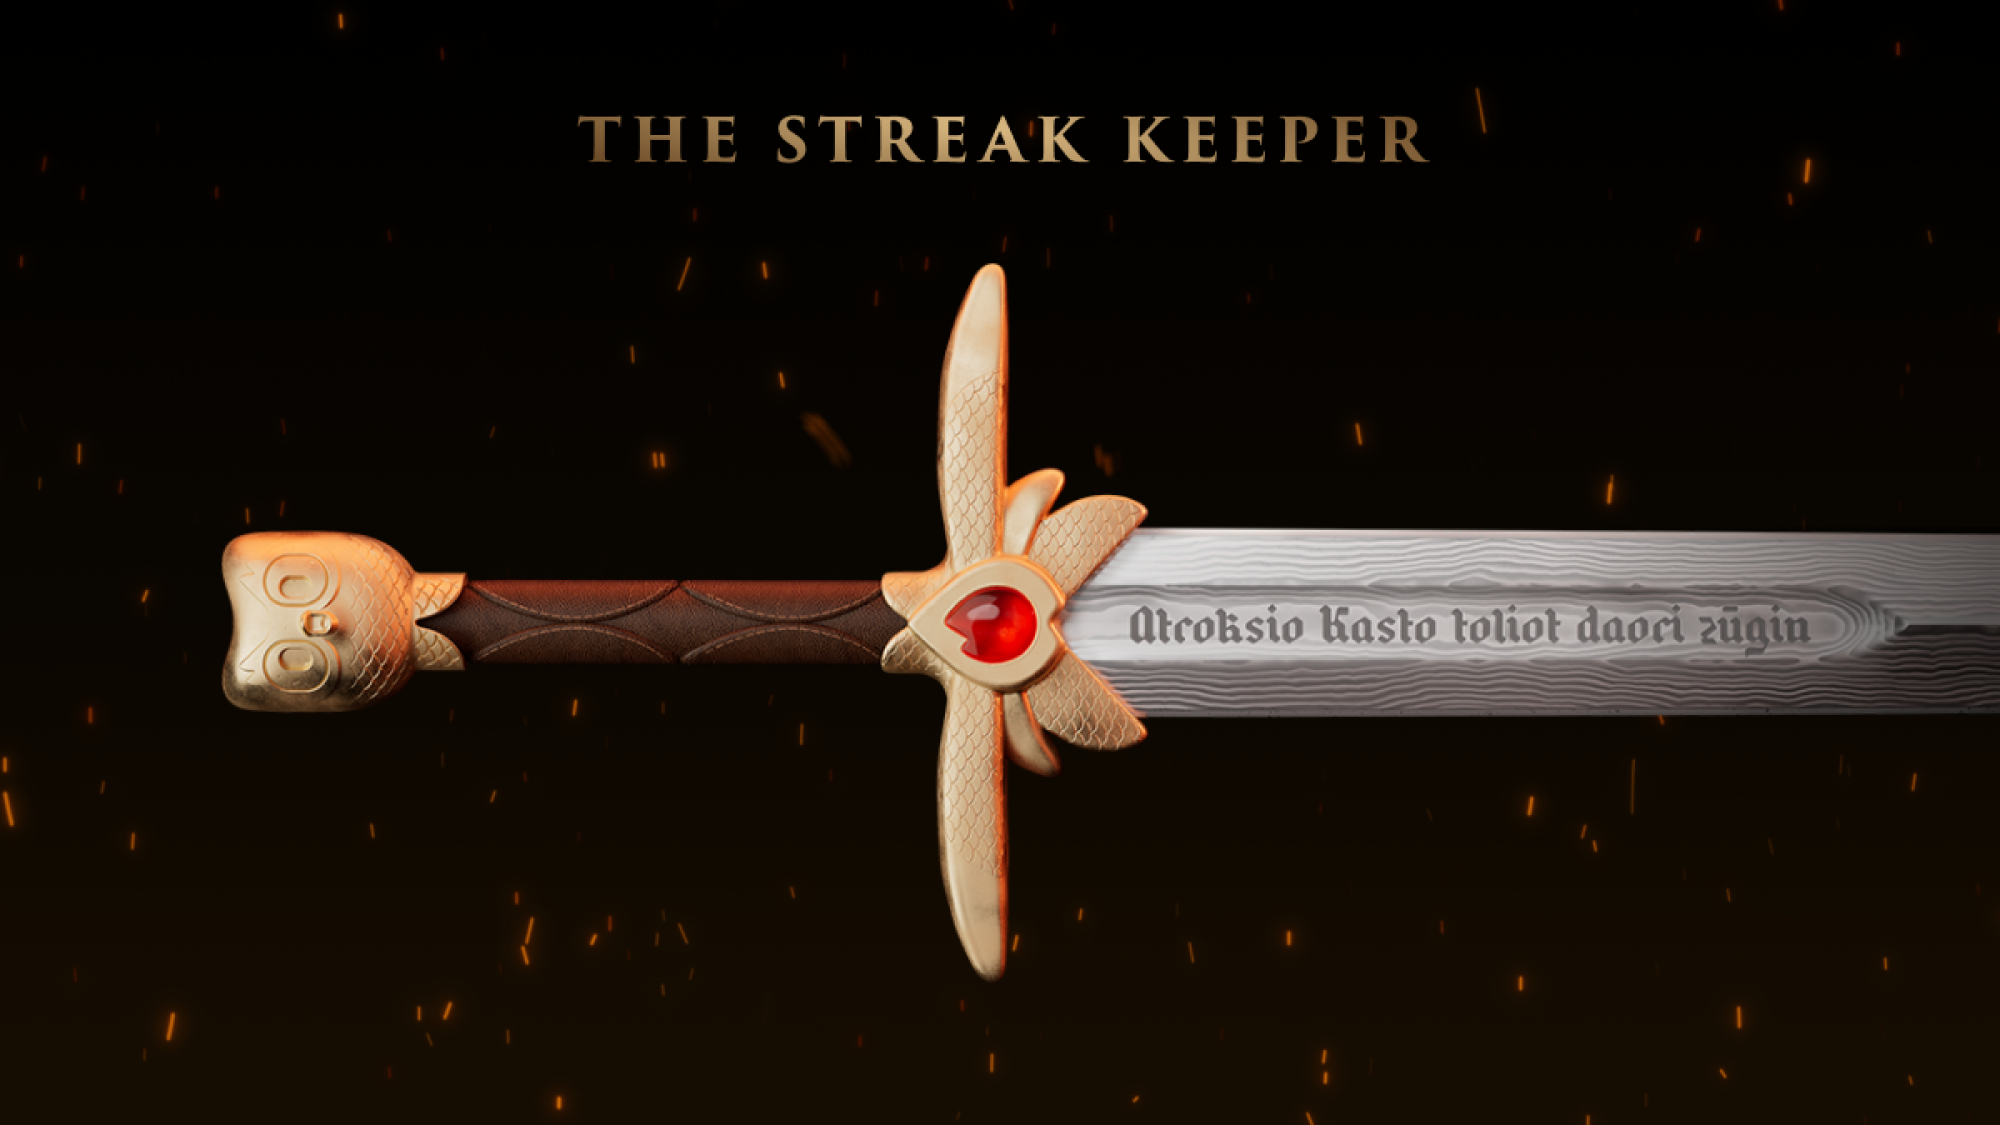 A sword with an owl on its pommel, and text above reading "the streak keeper."